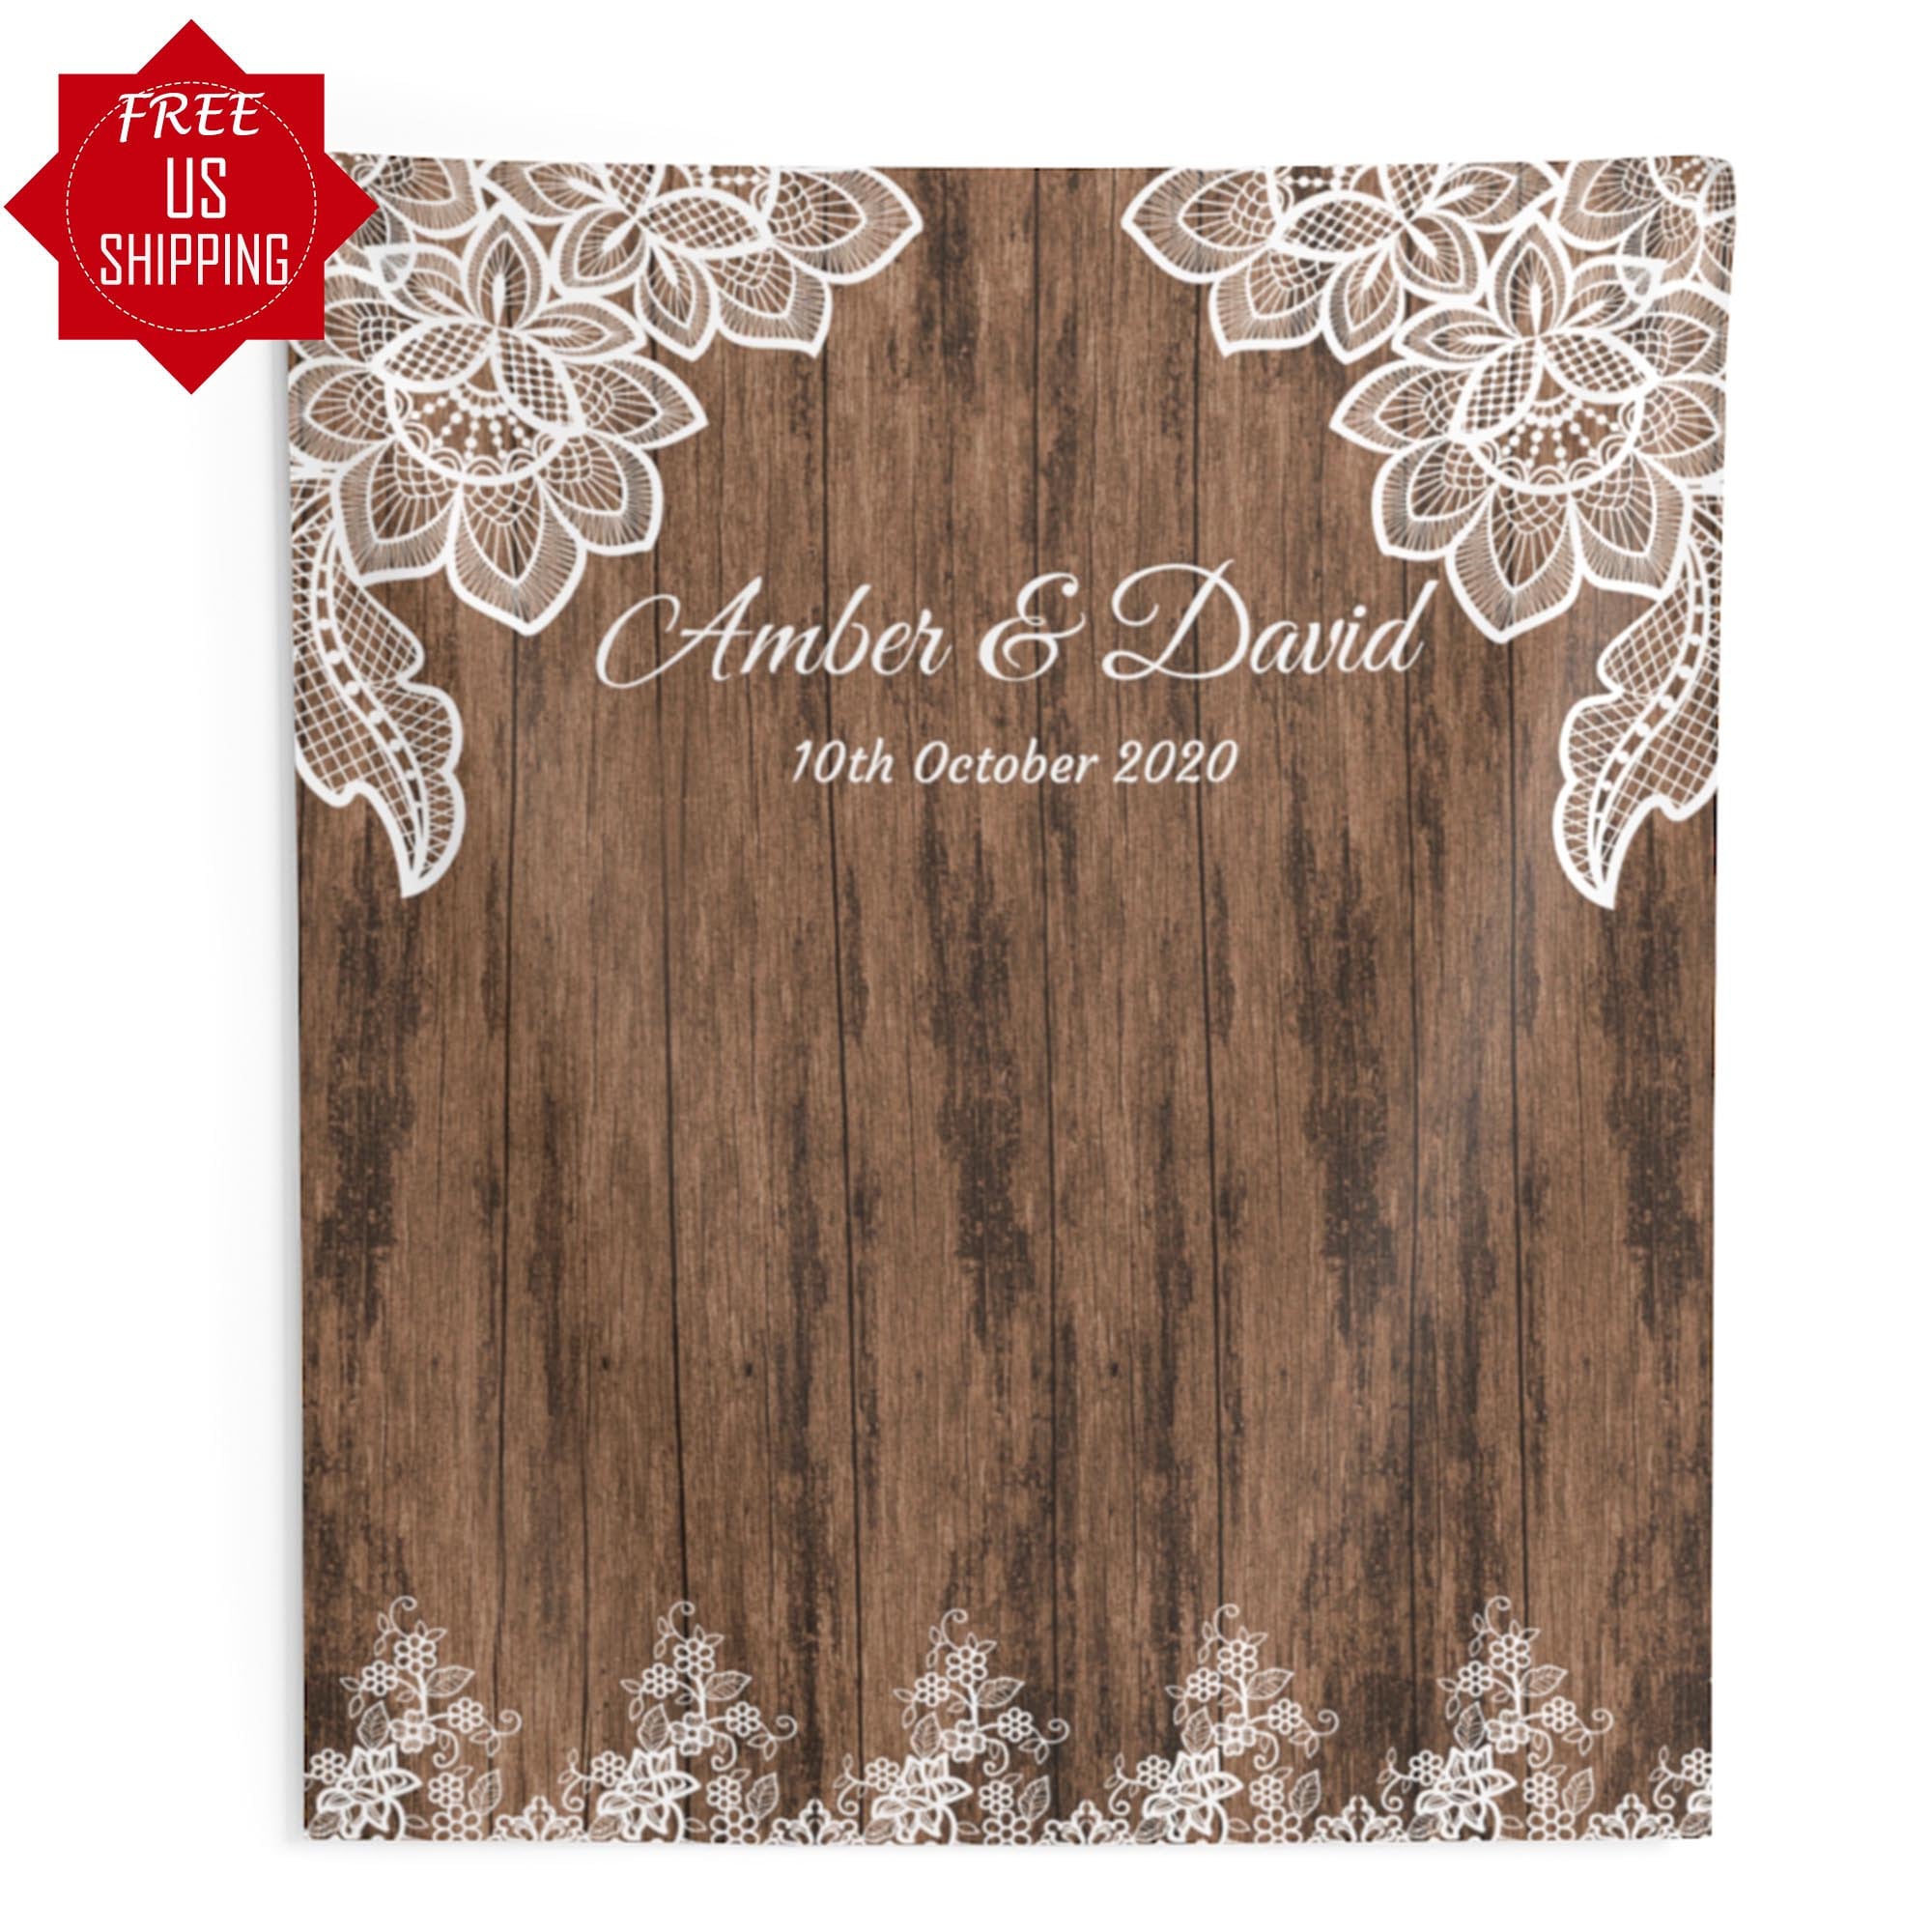 Rustic Lace Wedding Decor, Wedding Backdrop for Reception, Lace Wood, Outside, Barn Southern Wedding, Engagement Backdrop